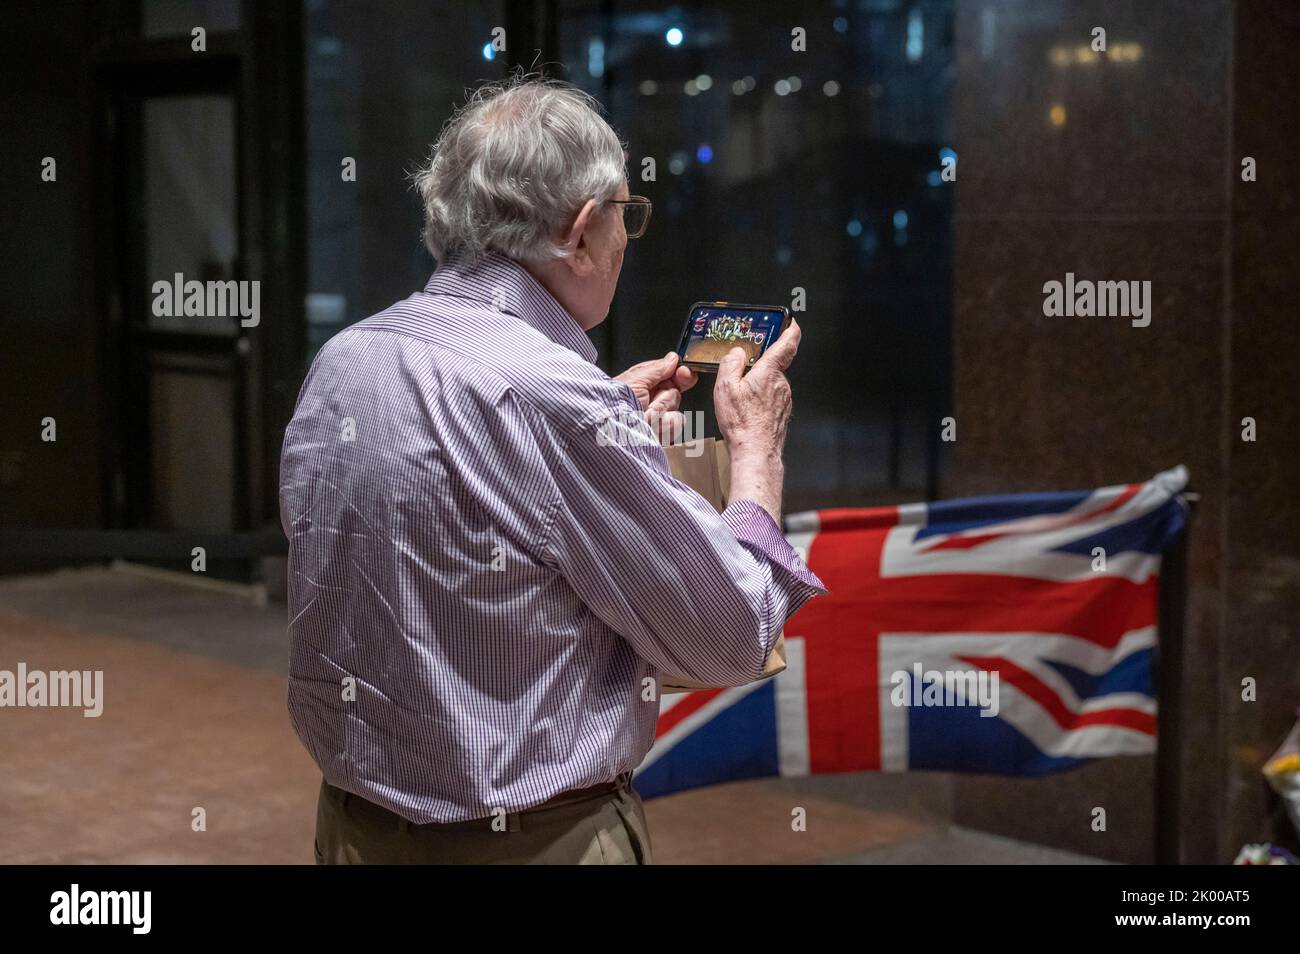 New York, United States. 08th Sep, 2022. A member of the public records on his phone the memorial for Her Majesty Queen Elizabeth II outside The British Consulate General in New York. According to a statement issued by Buckingham Palace on 08 September 2022, Britain's Queen Elizabeth II has died at her Scottish estate, Balmoral Castle. The 96-year-old Queen was the longest-reigning monarch in British history. Credit: SOPA Images Limited/Alamy Live News Stock Photo